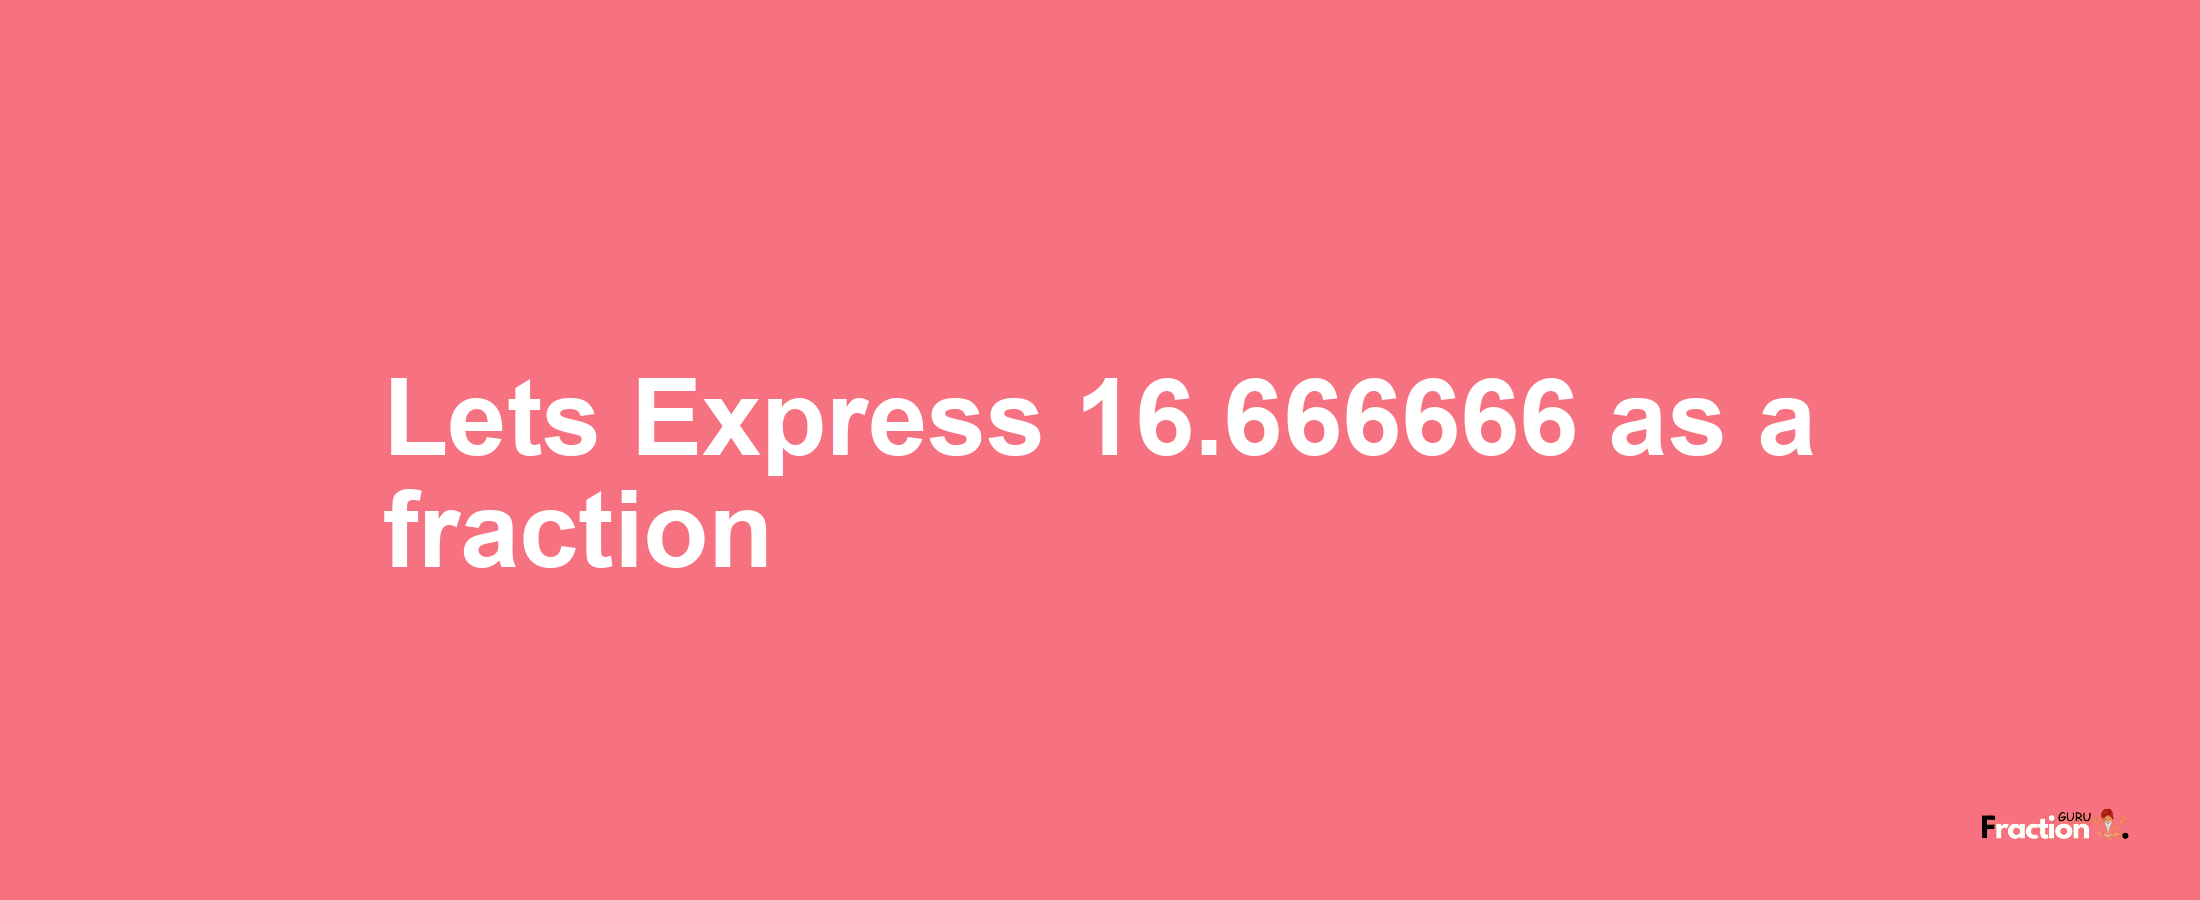 Lets Express 16.666666 as afraction